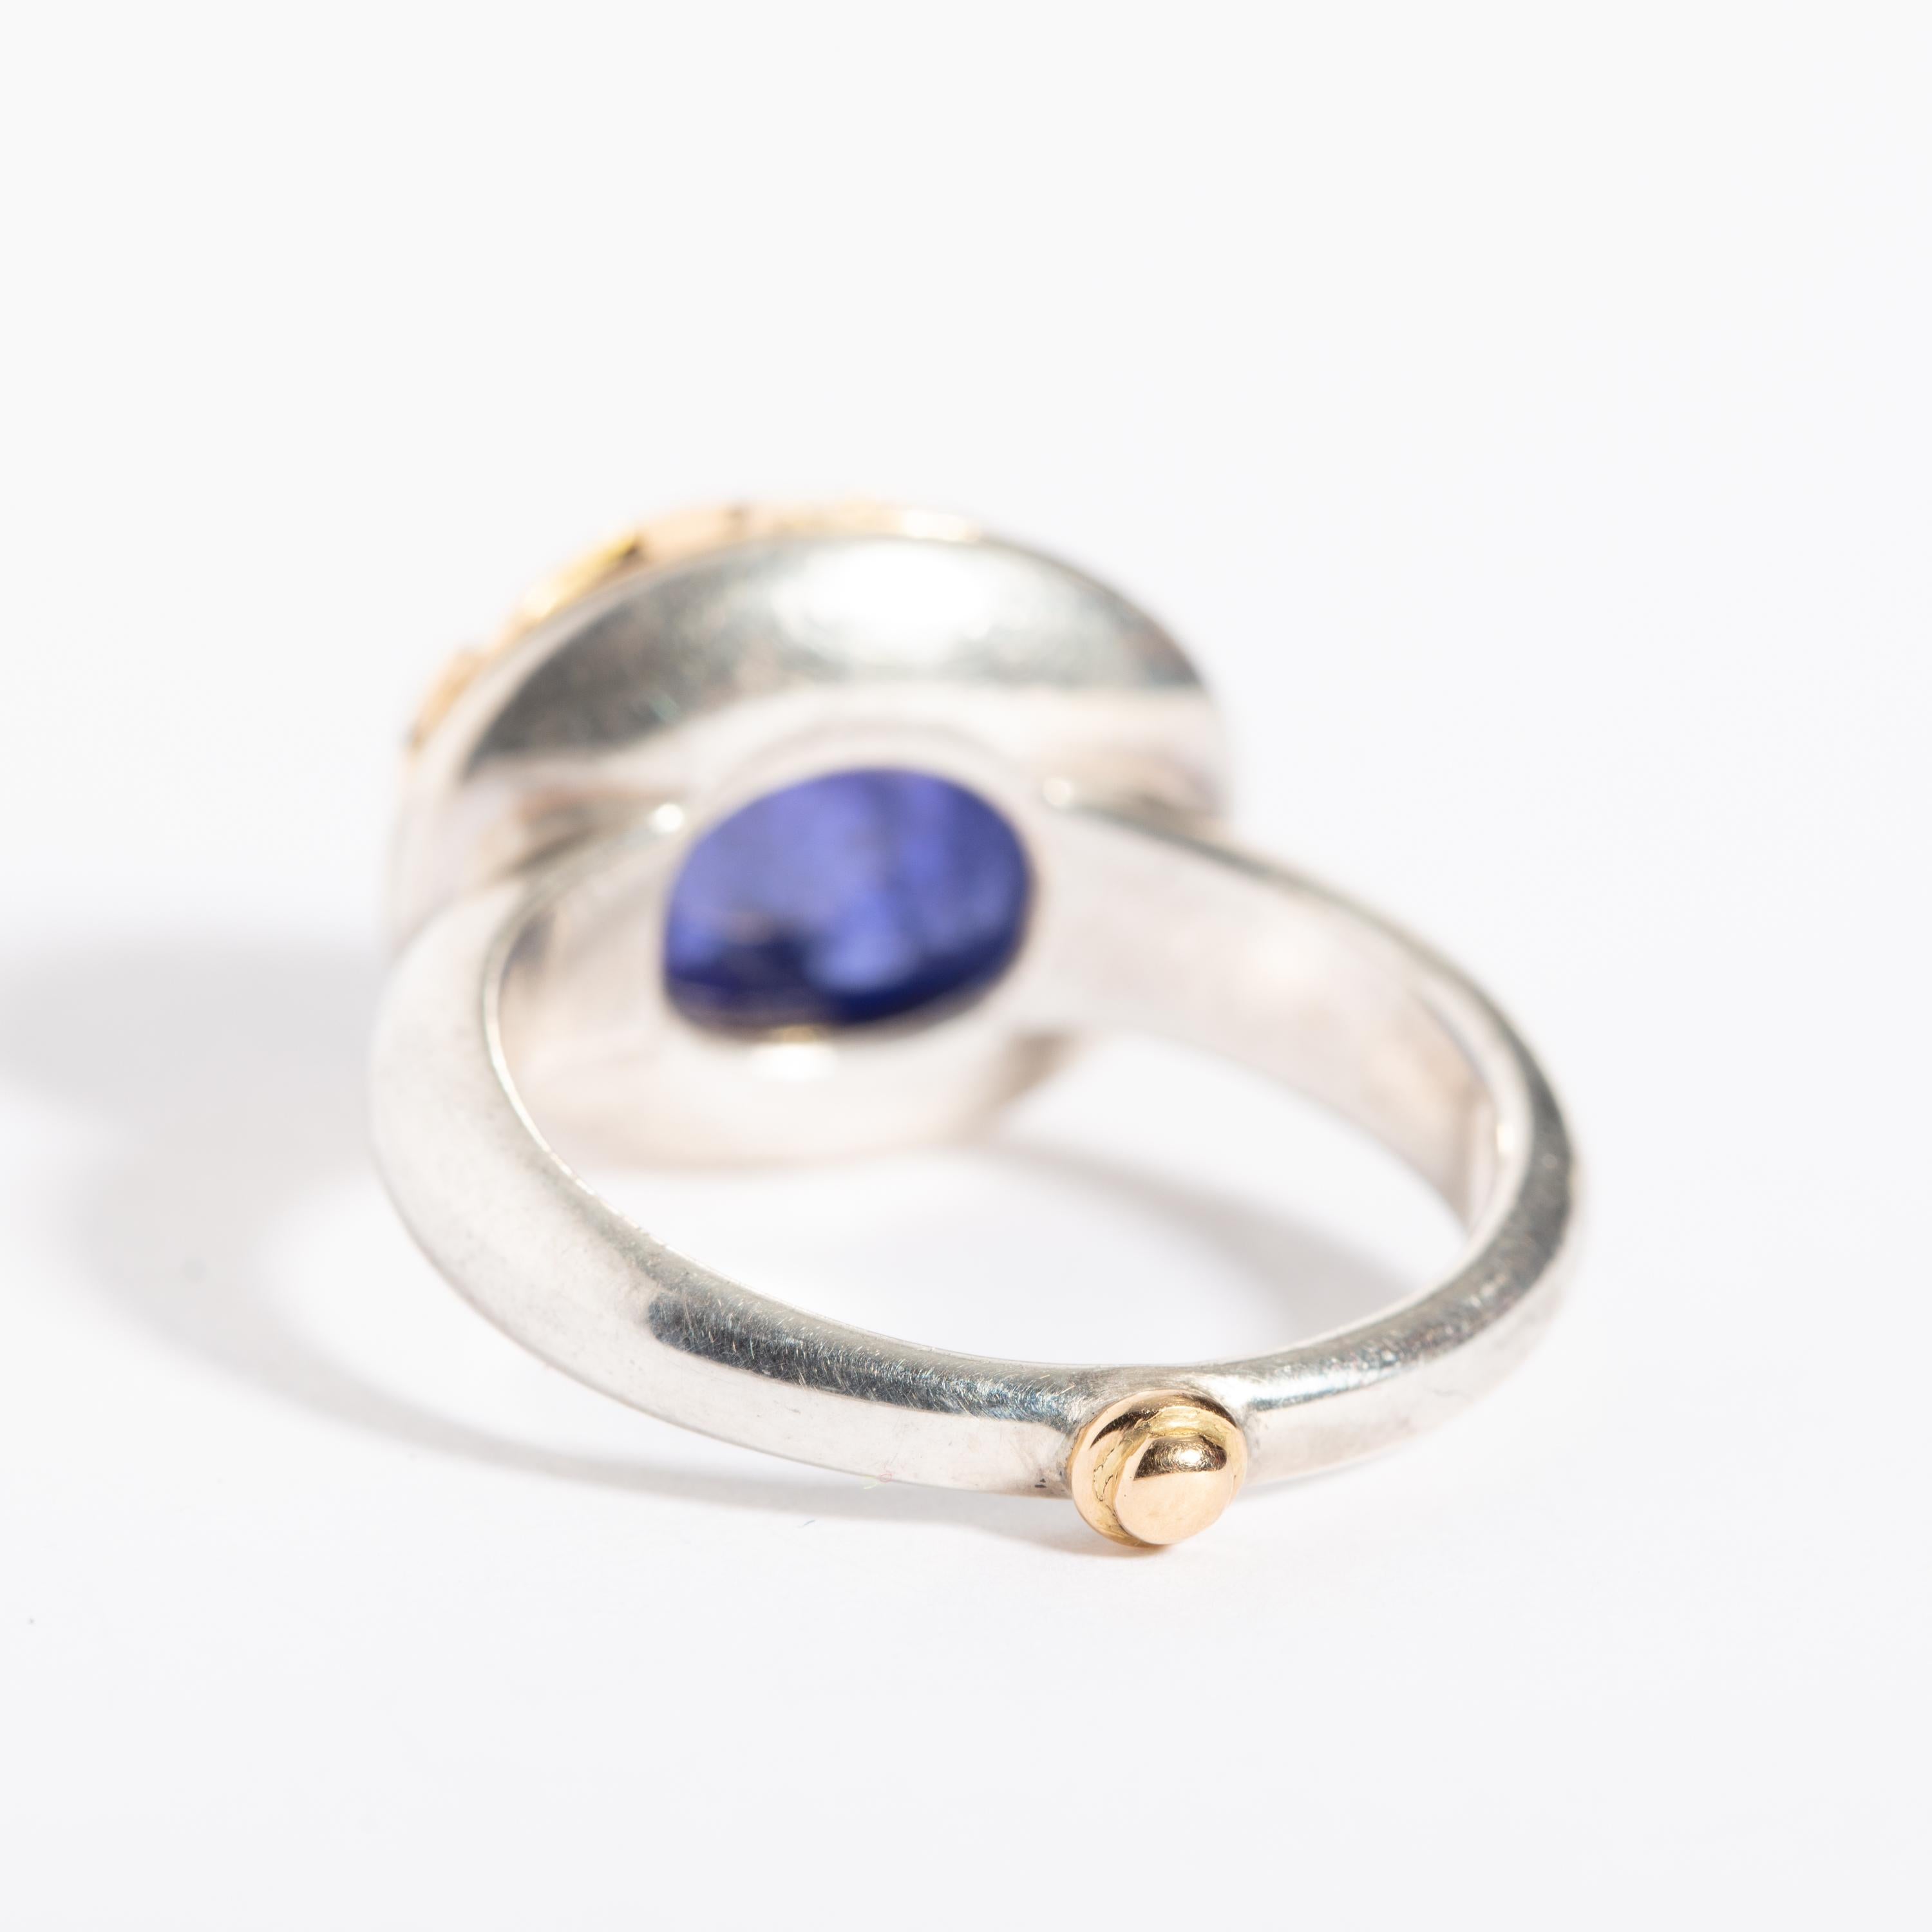 Women's or Men's Blue Sapphire Ring in 18 Karat Gold and Sterling Silver Band